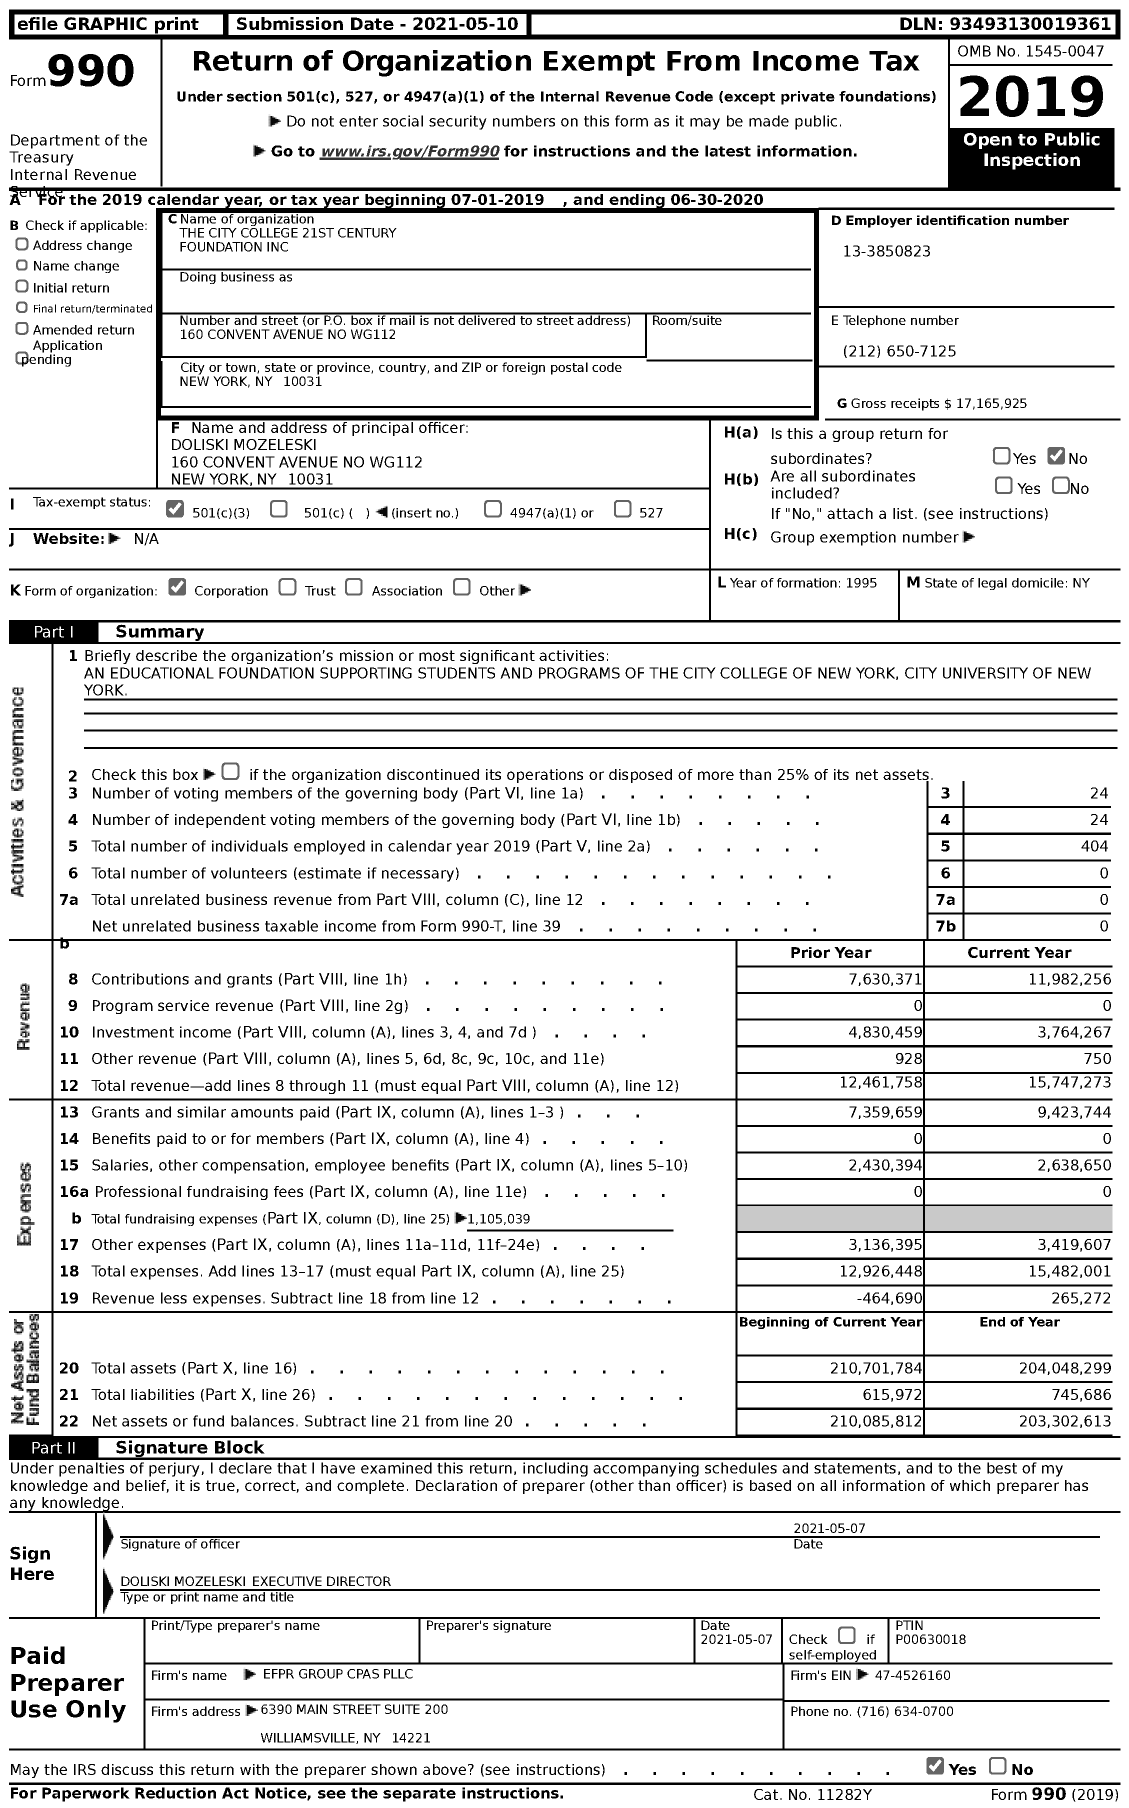 Image of first page of 2019 Form 990 for The City College 21ST Century Foundation